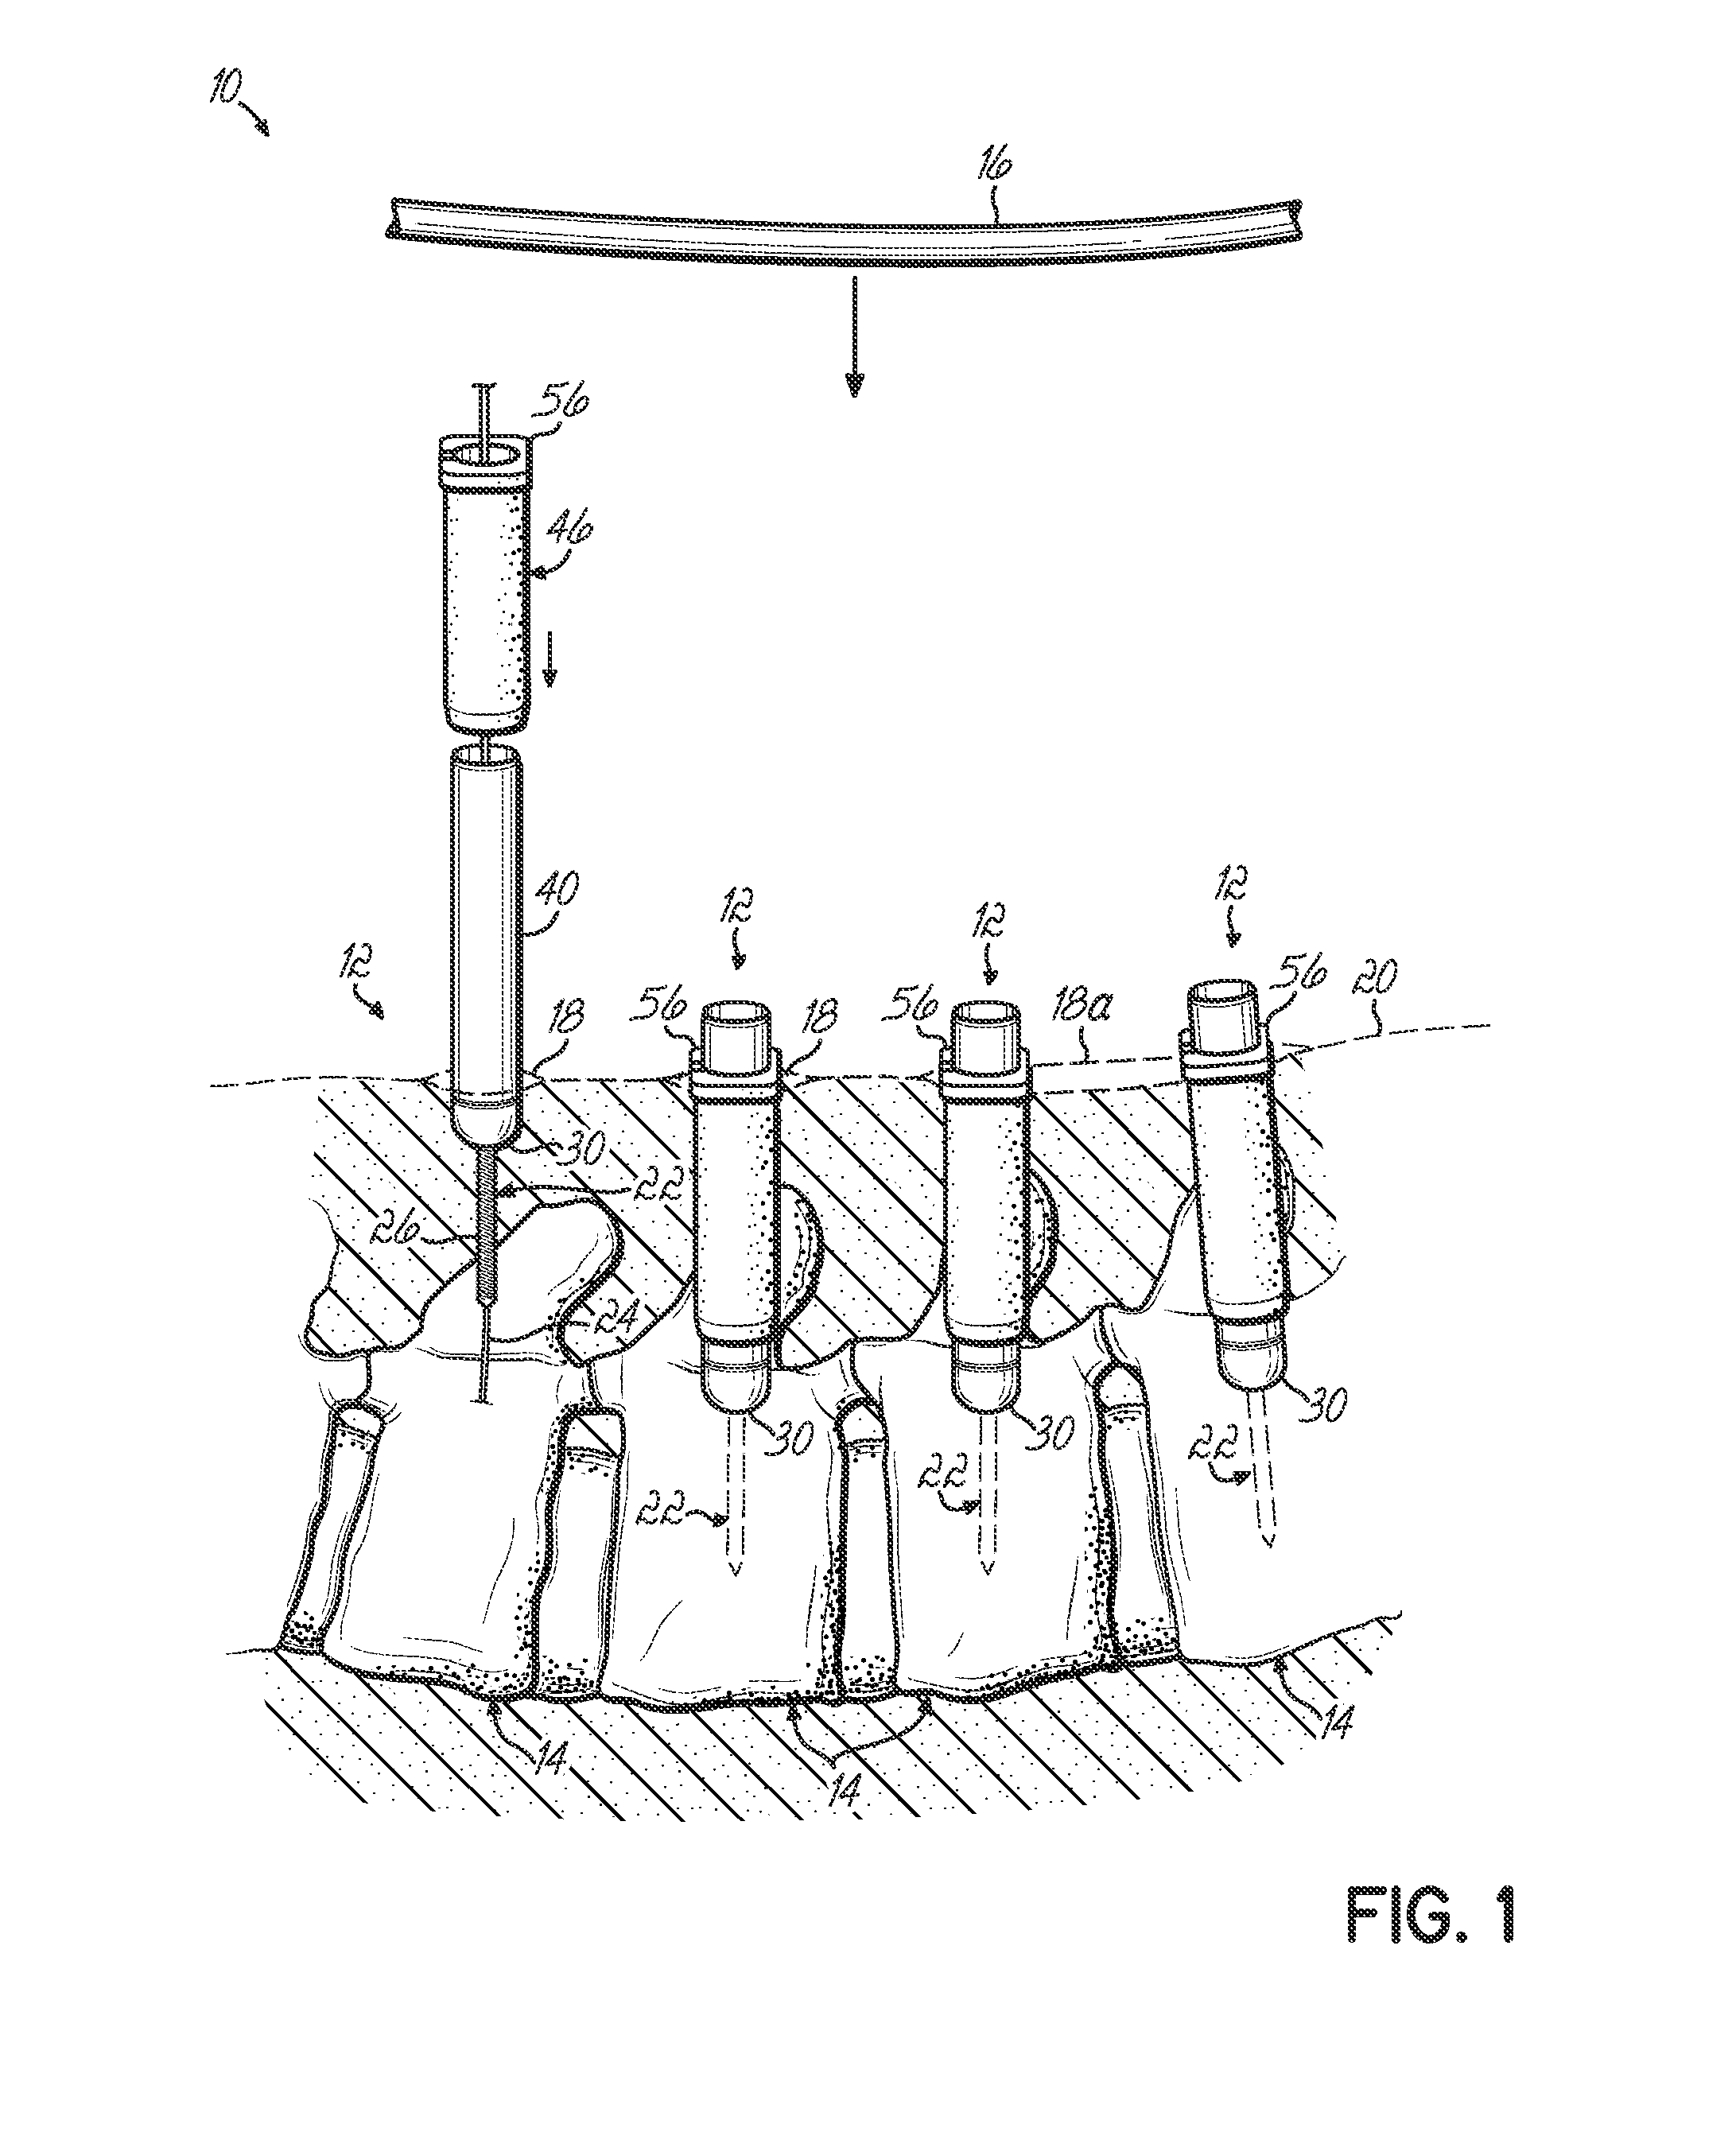 Minimally invasive pedicle screw access system and associated method